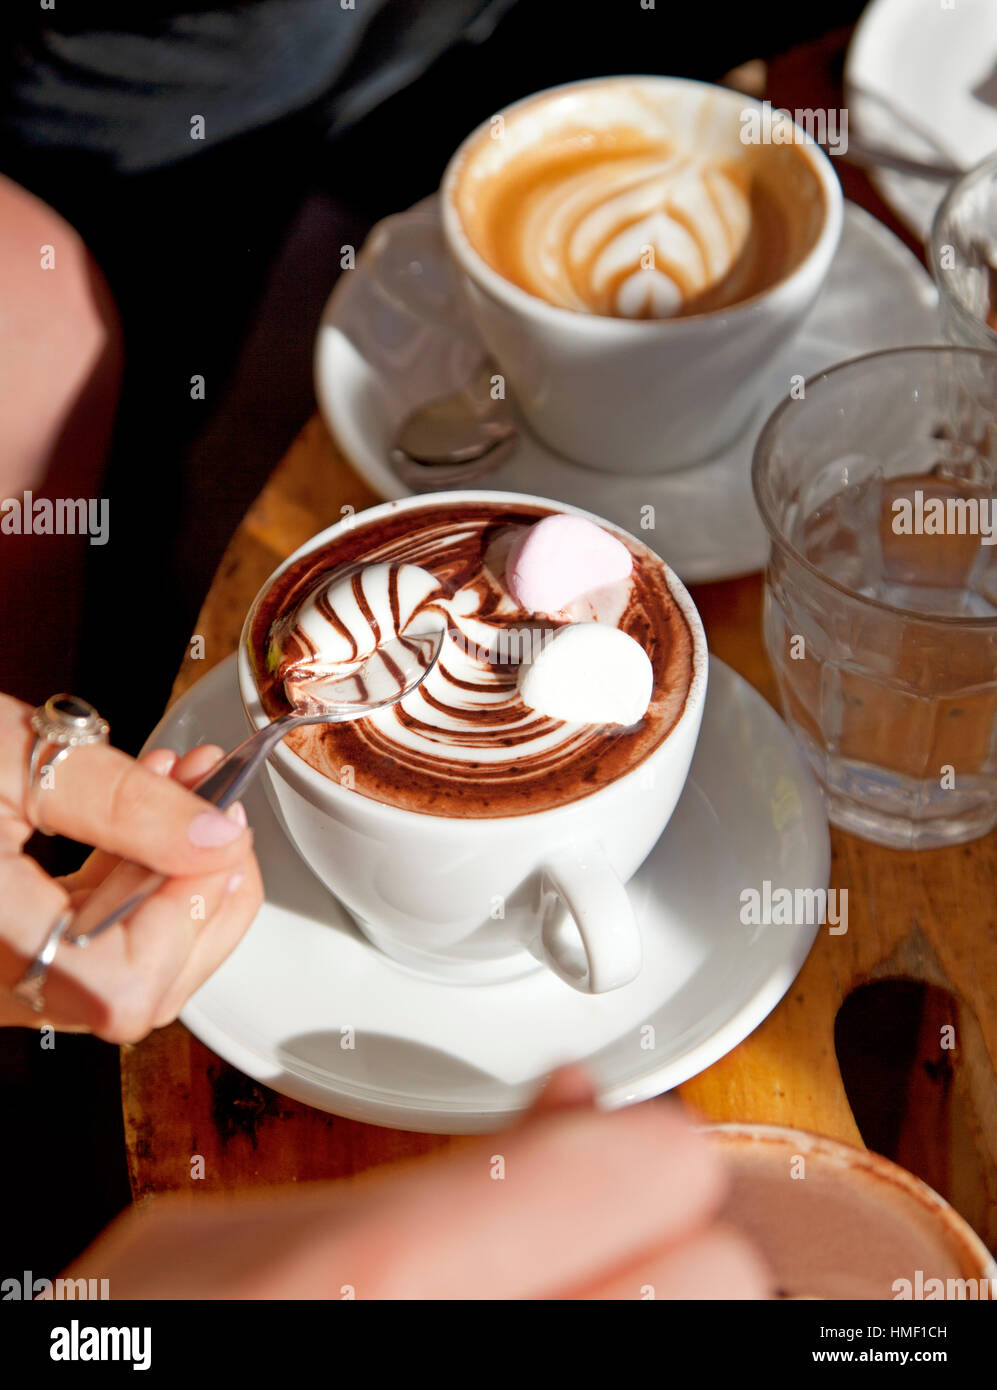 https://c8.alamy.com/comp/HMF1CH/a-cup-of-swirled-hot-chocolate-and-marshmallows-on-a-rustic-cafe-table-HMF1CH.jpg